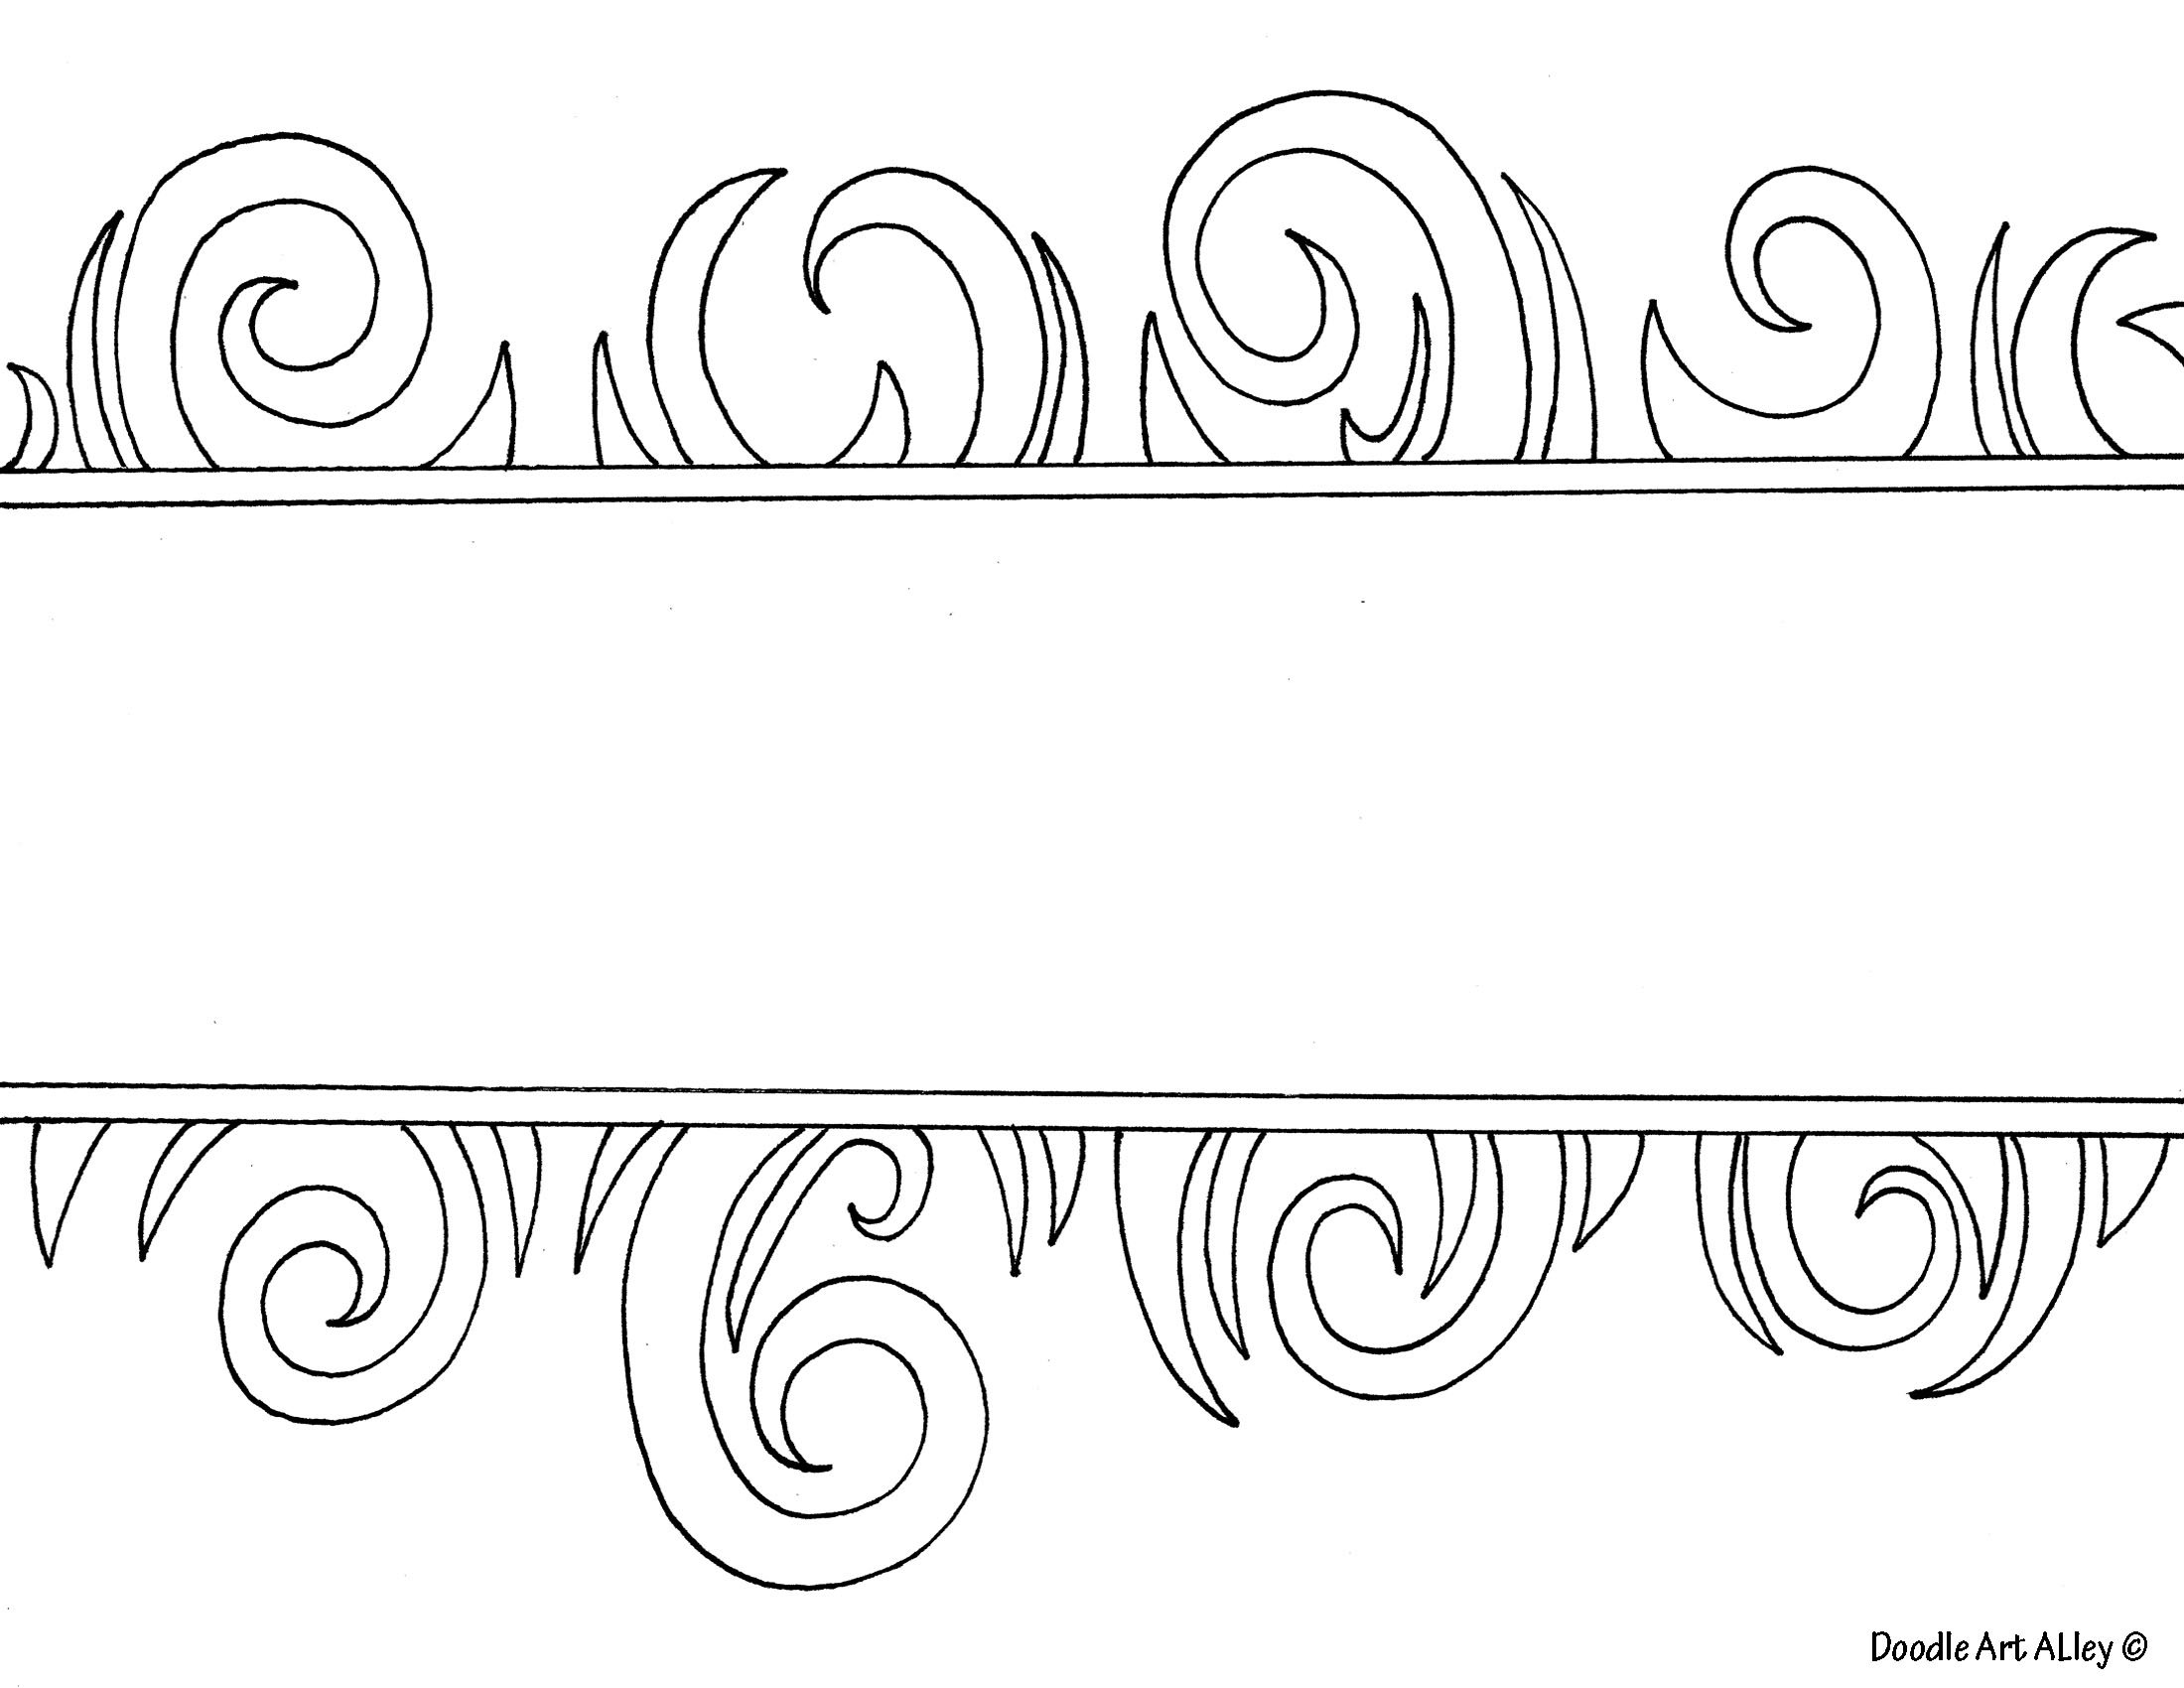 Name Templates Coloring Pages Doodle Art Alley